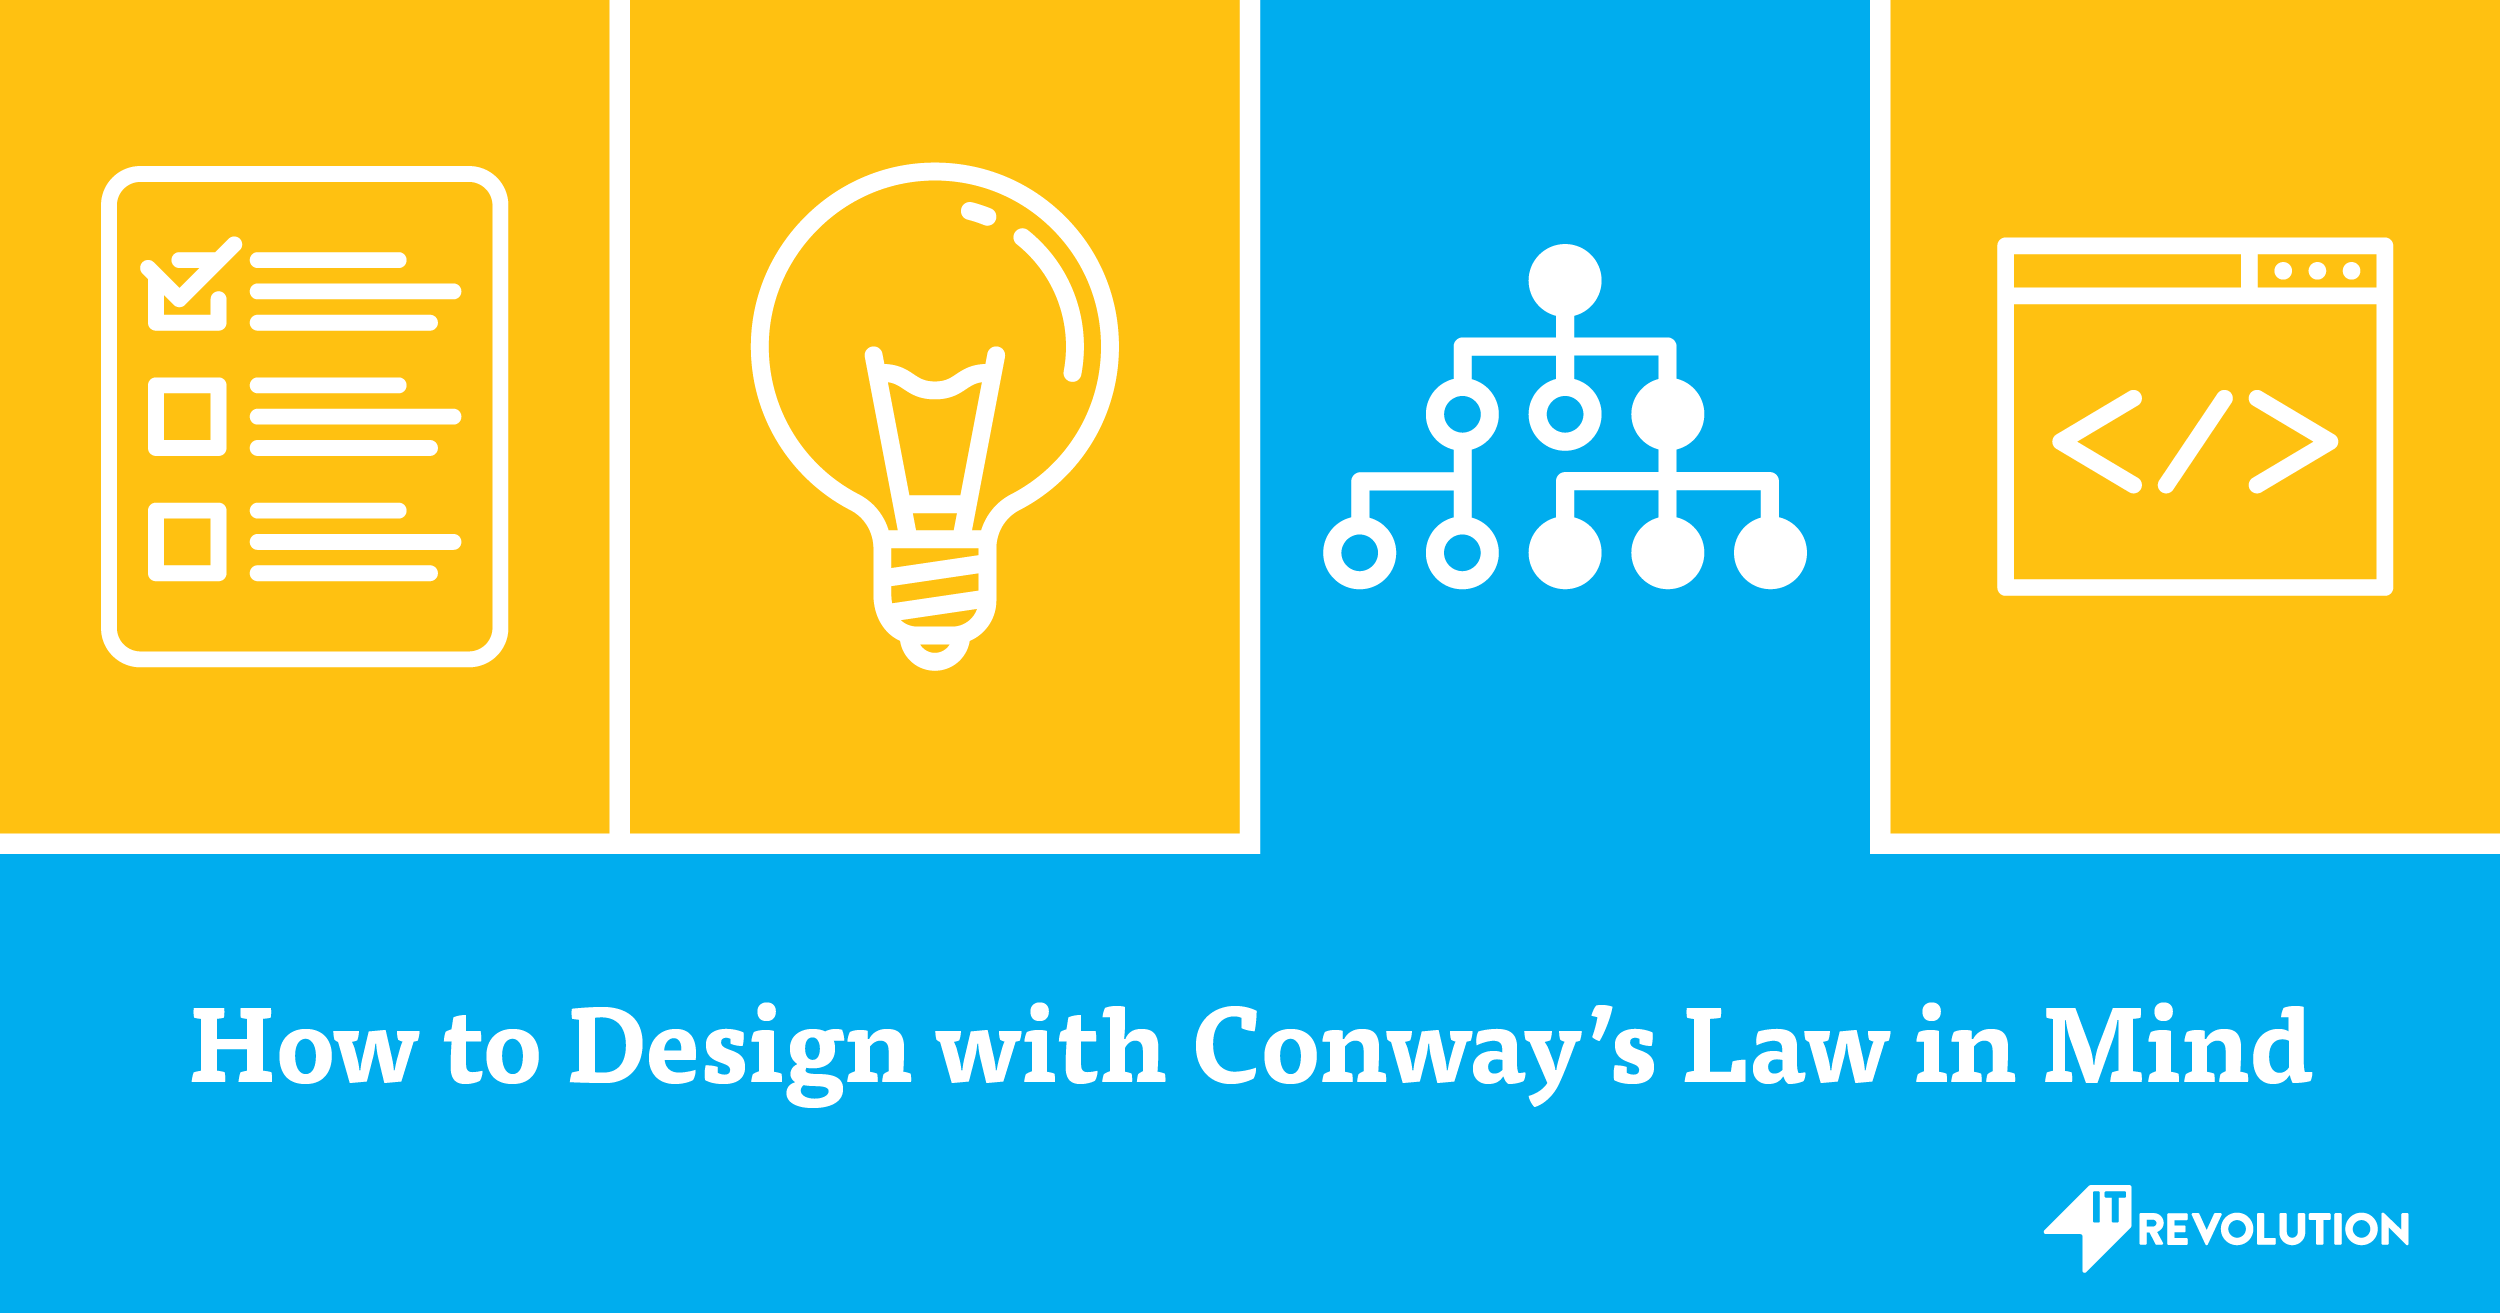 how to design with conway's law in mind